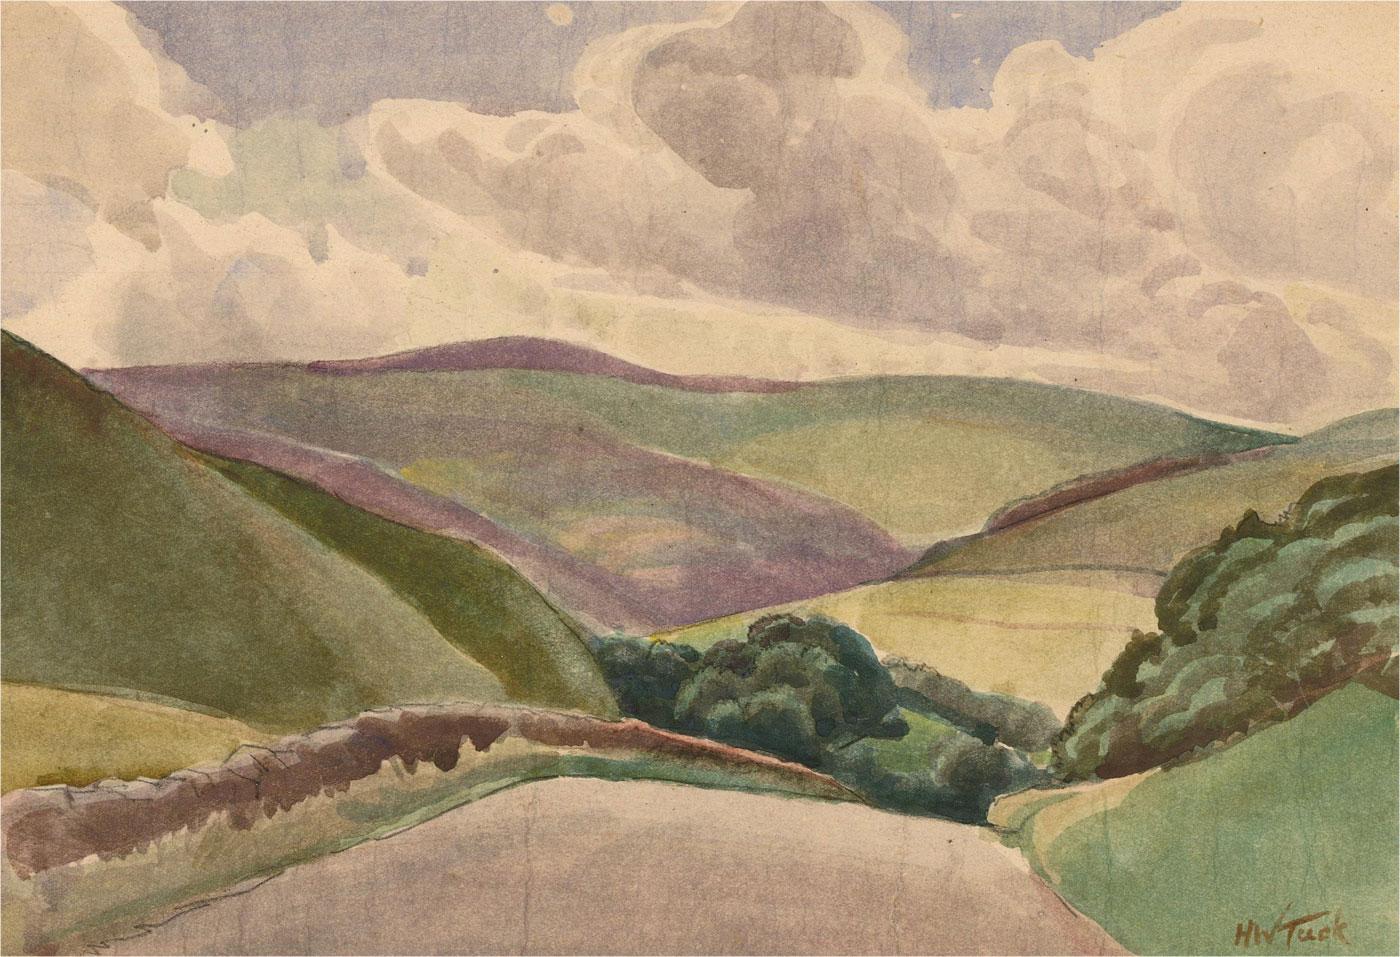 A charming landscape scene of rural Mid-Wales depicting the rolling hills against a cloudy sky. Signed to the lower right. On wove laid to card .
